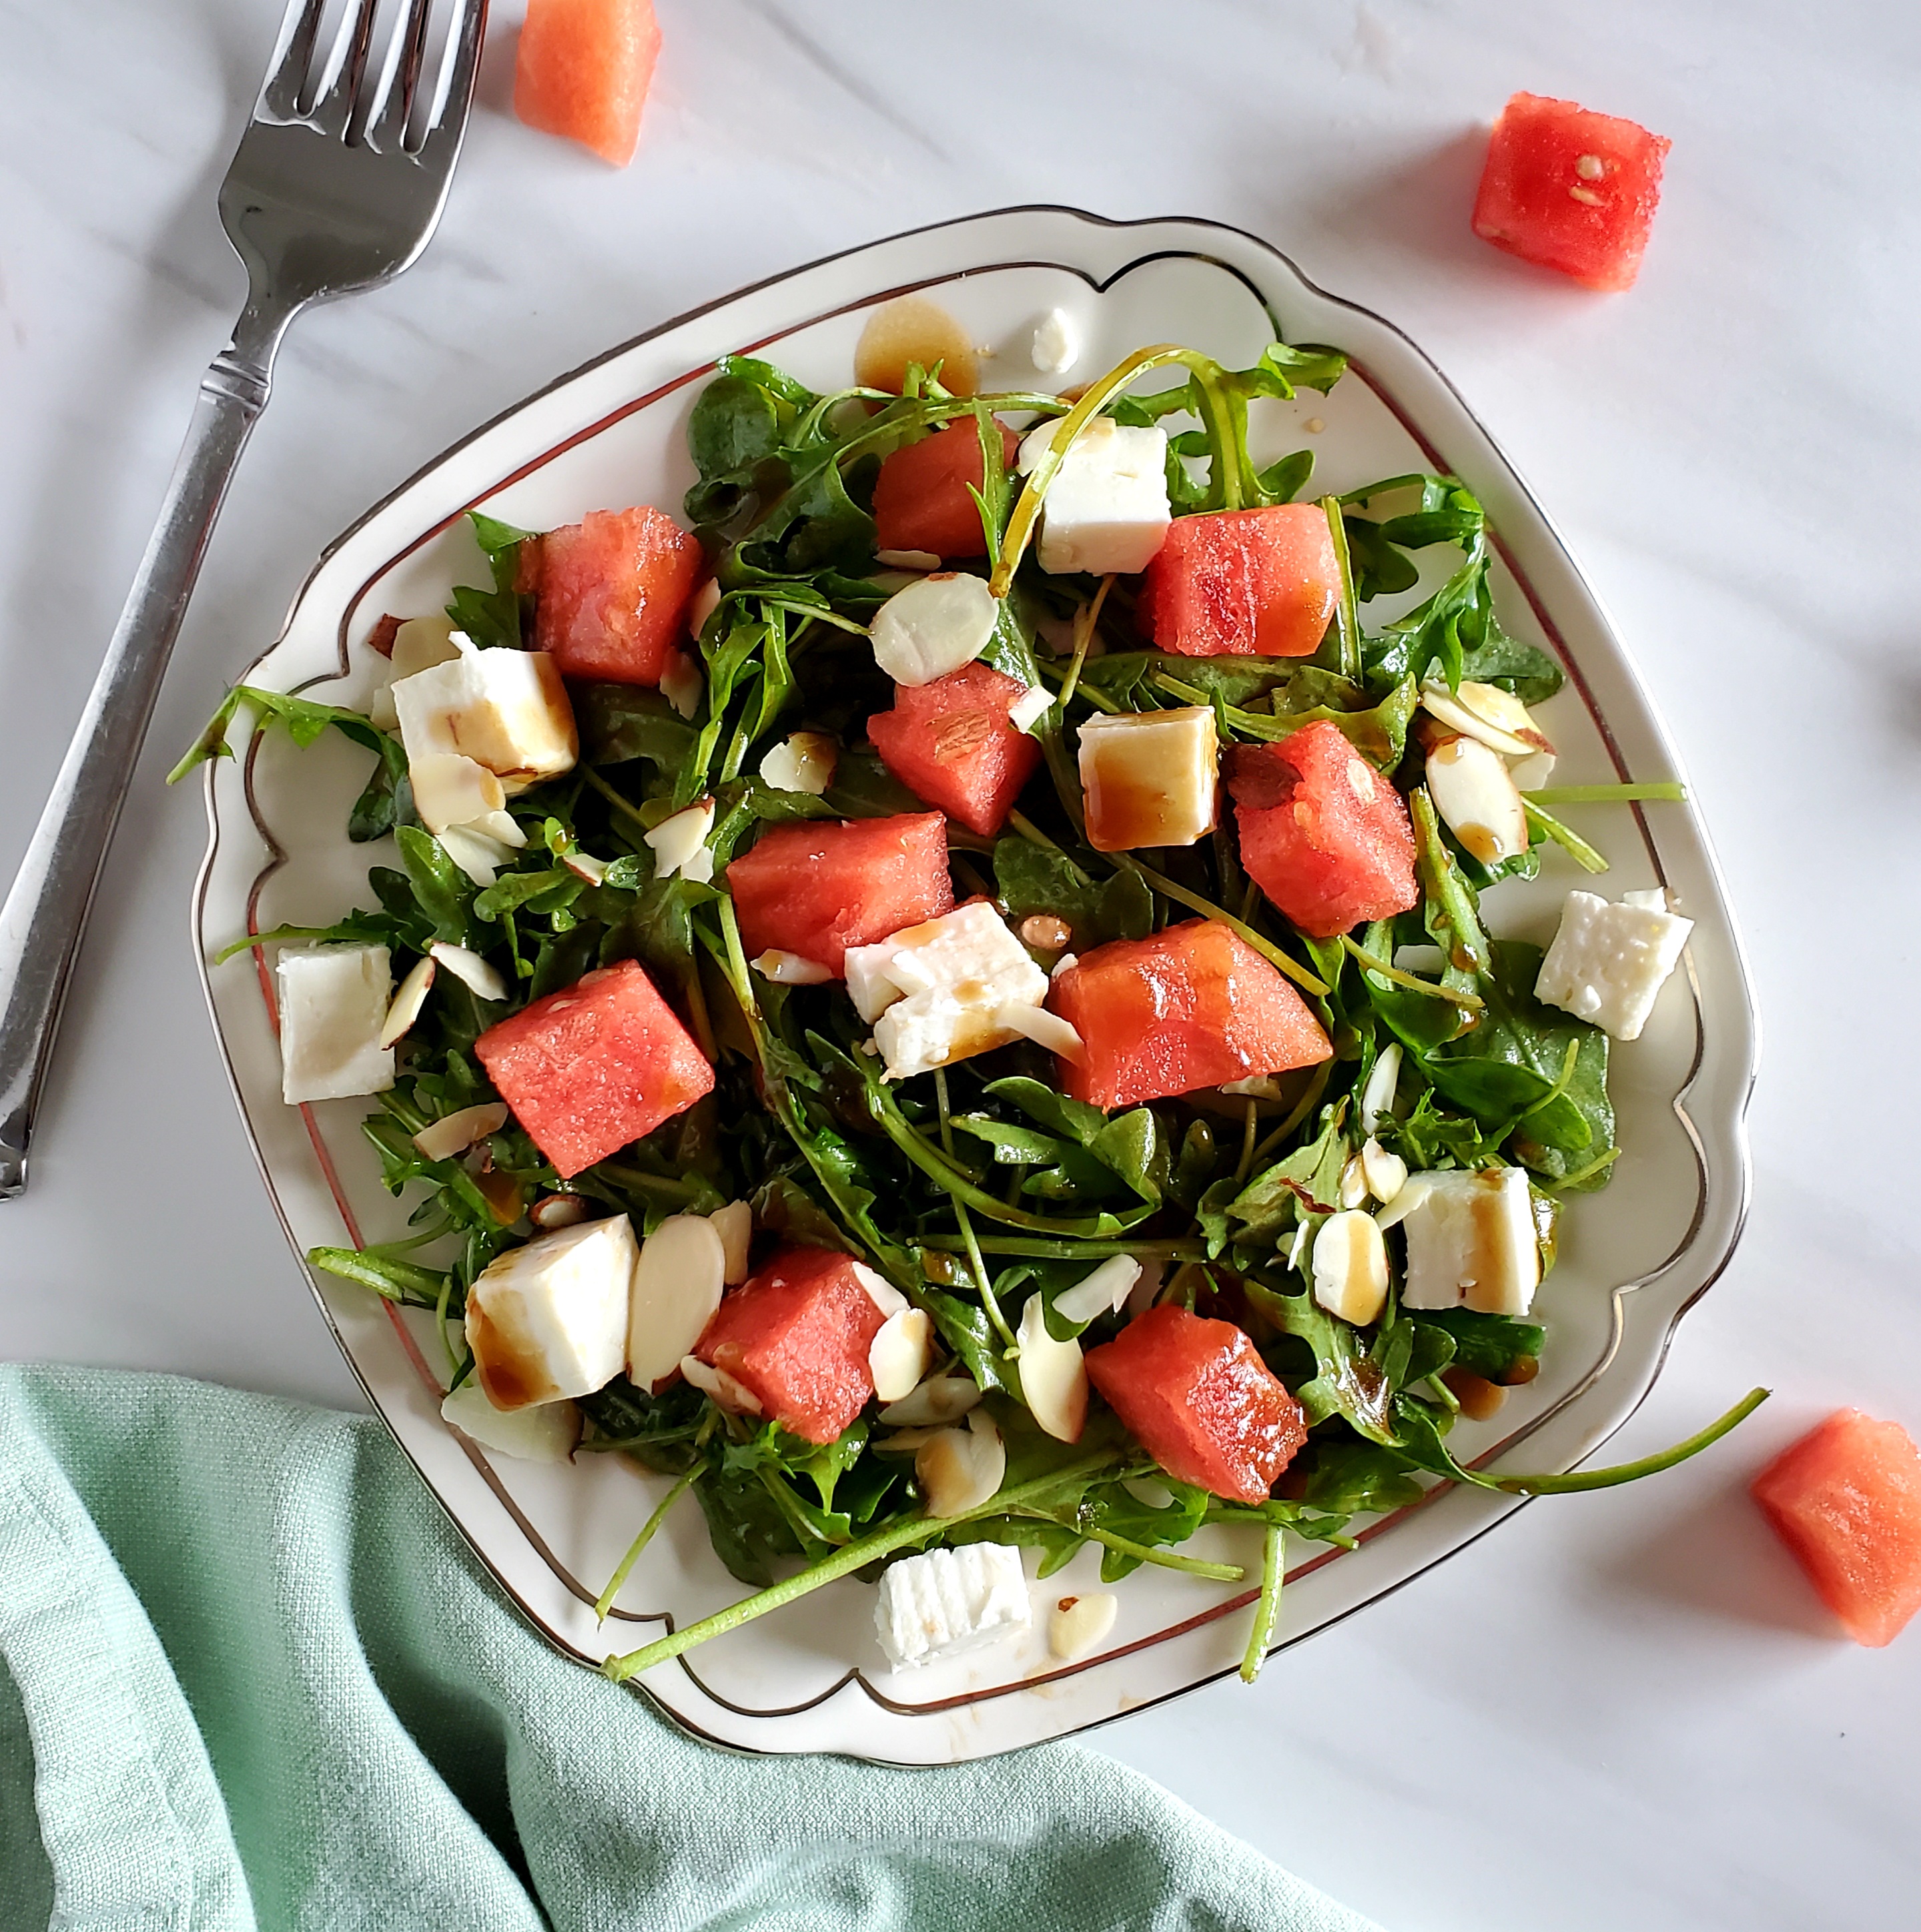 Arugula Salad with Watermelon and Feta (Recipe Inspired by THE MAIDENS)